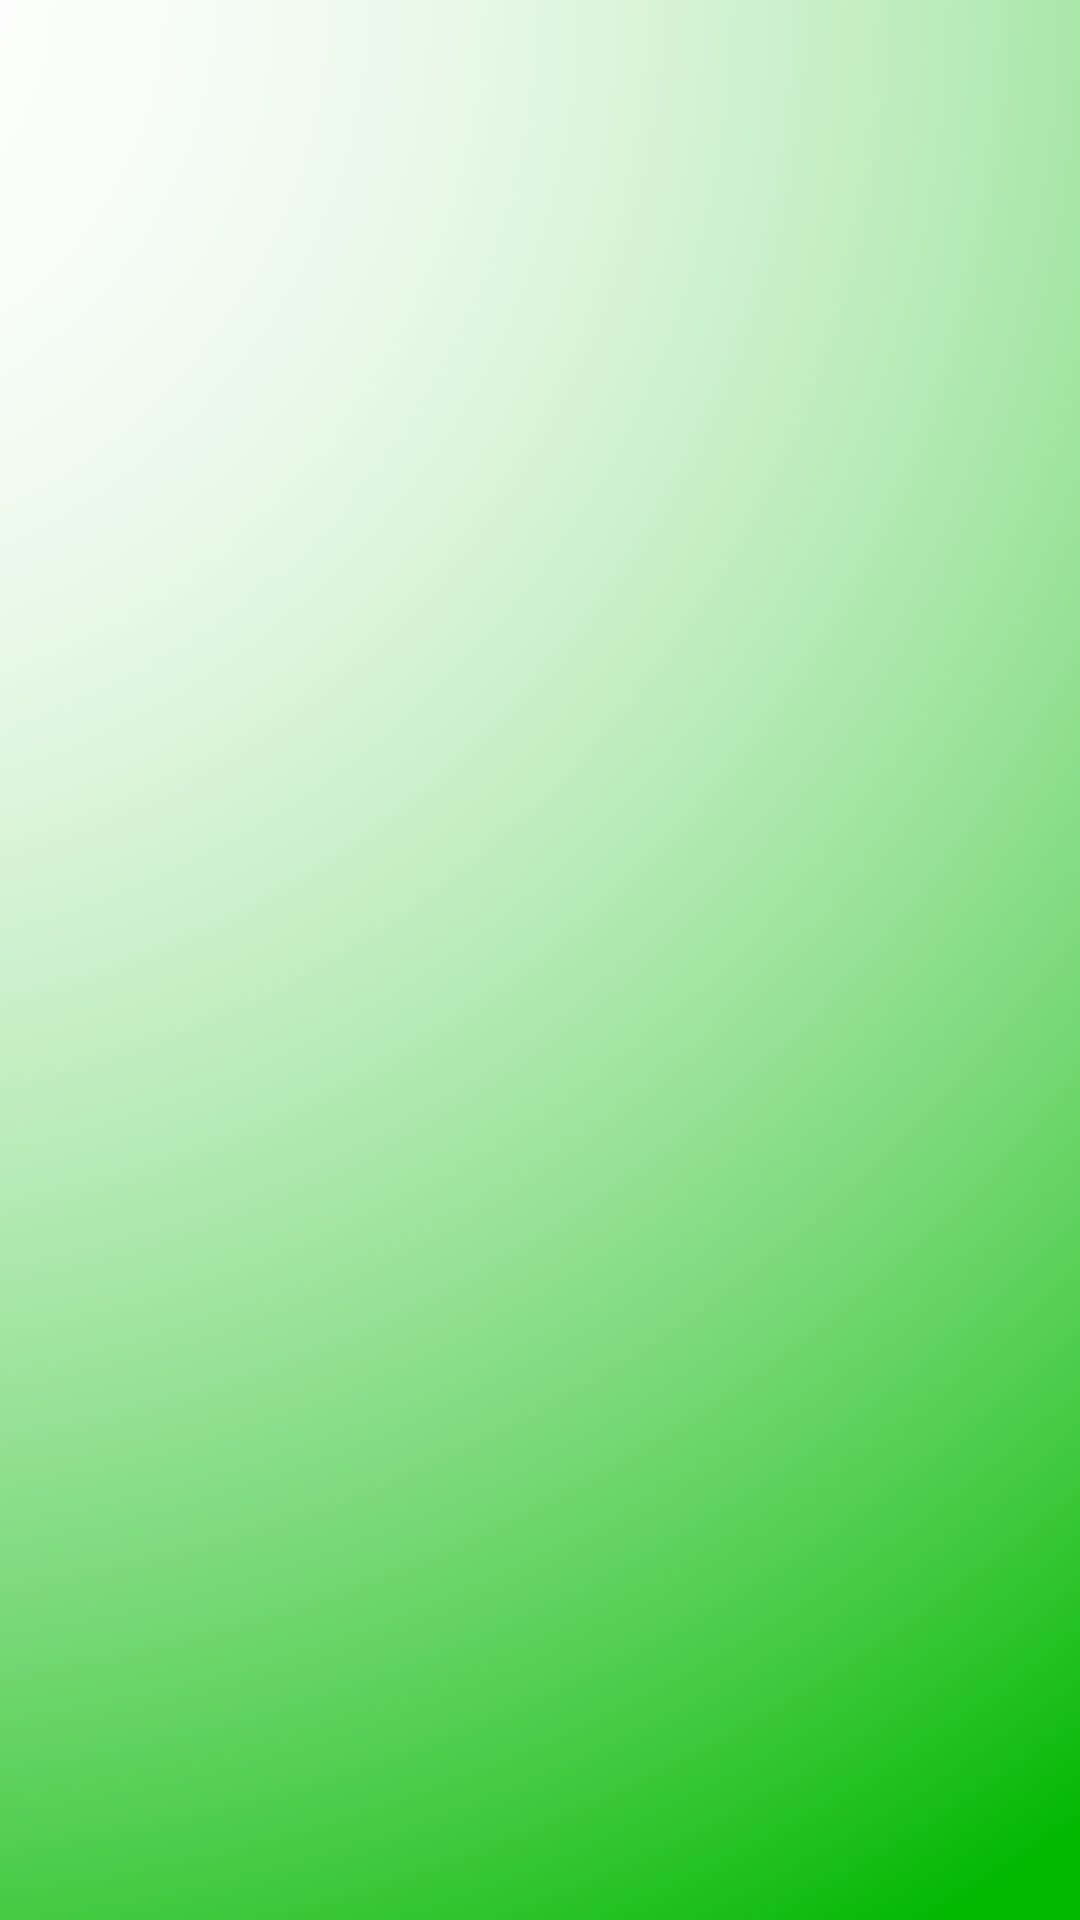 A vibrantly colored Green Gradient backgrounds